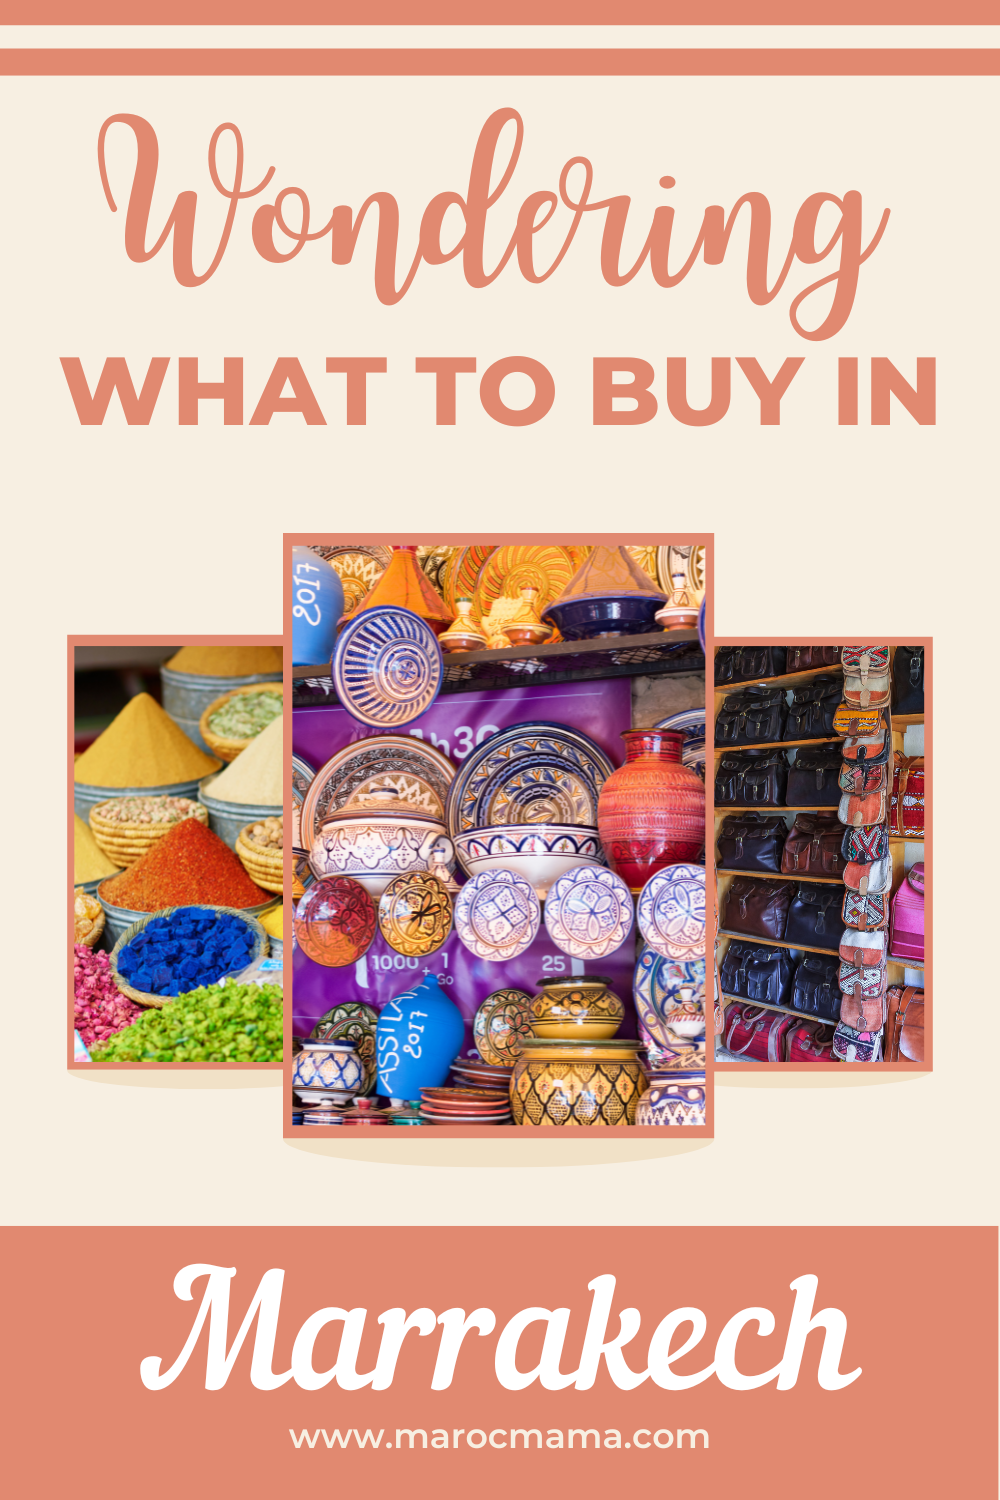 several things to buy in Marrakech